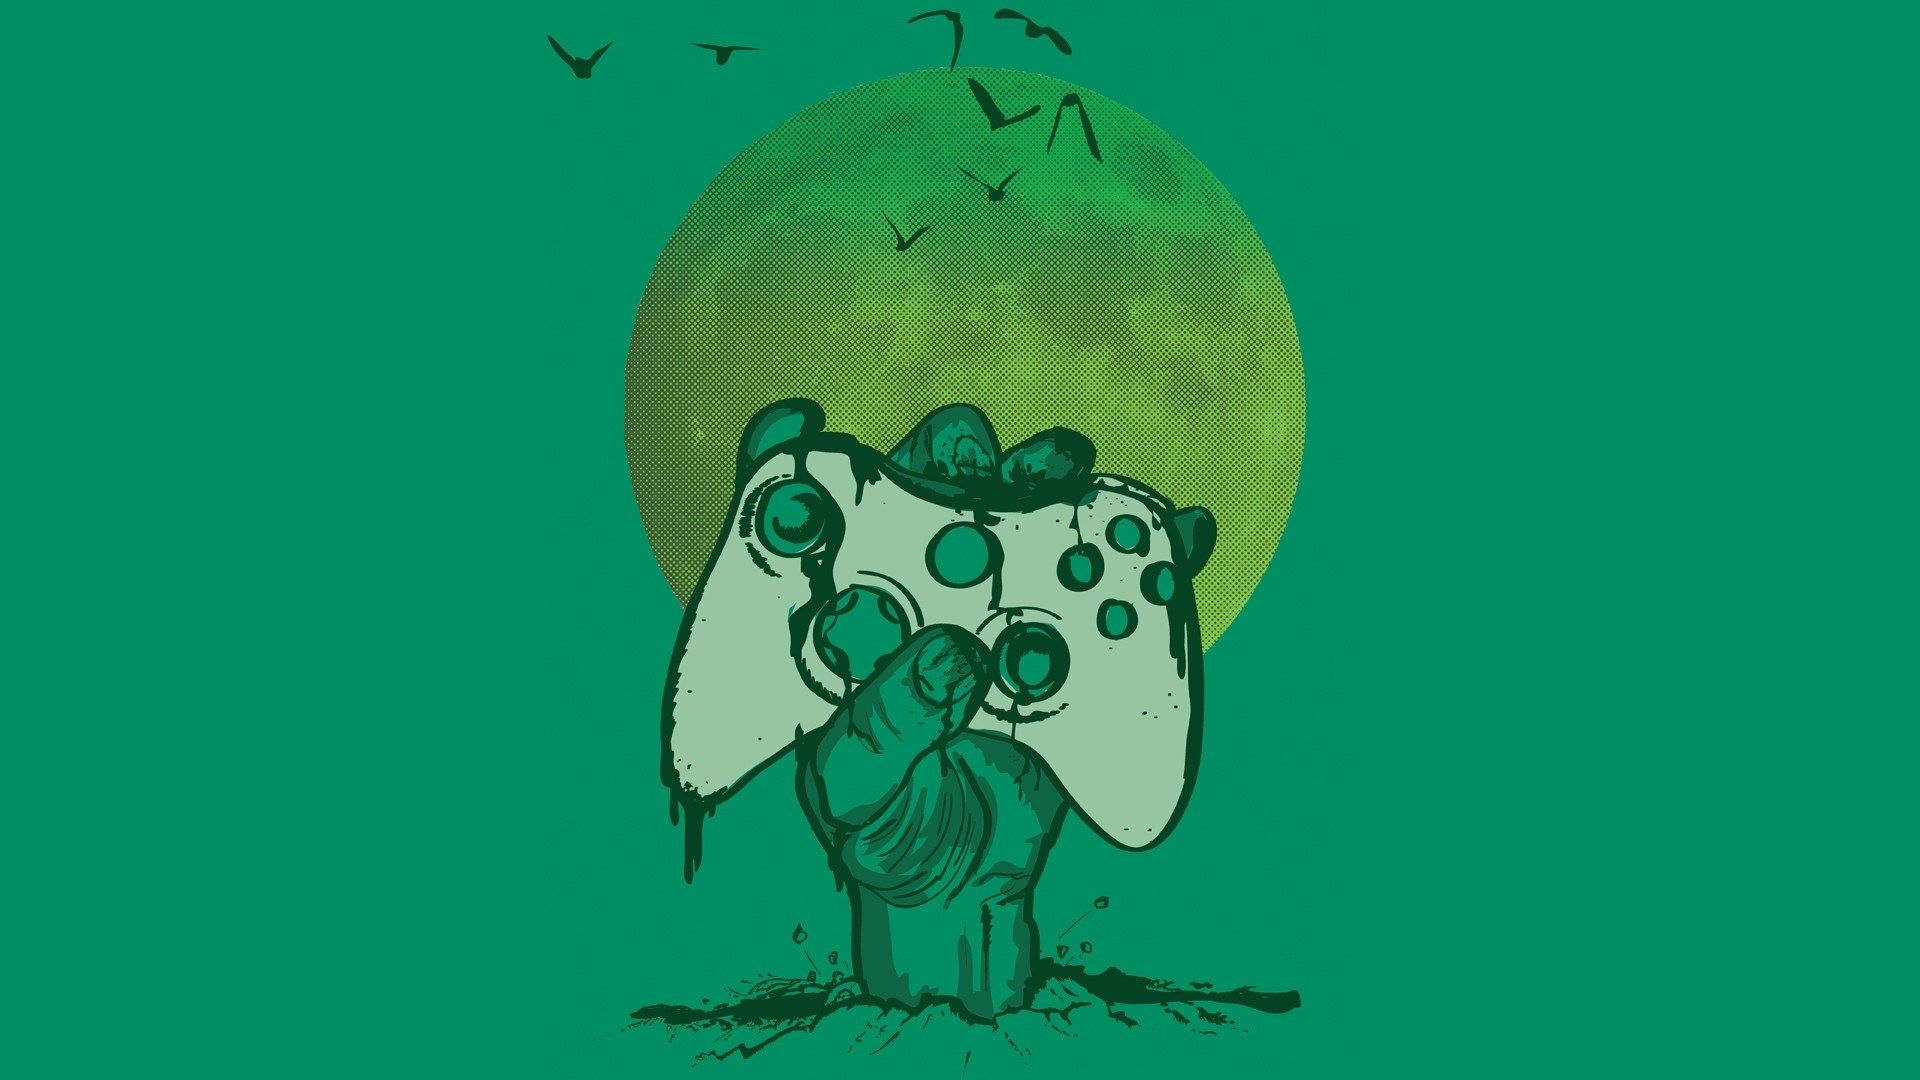 X xbox hd pc wallpaper gaming wallpapers xbox cute zombie